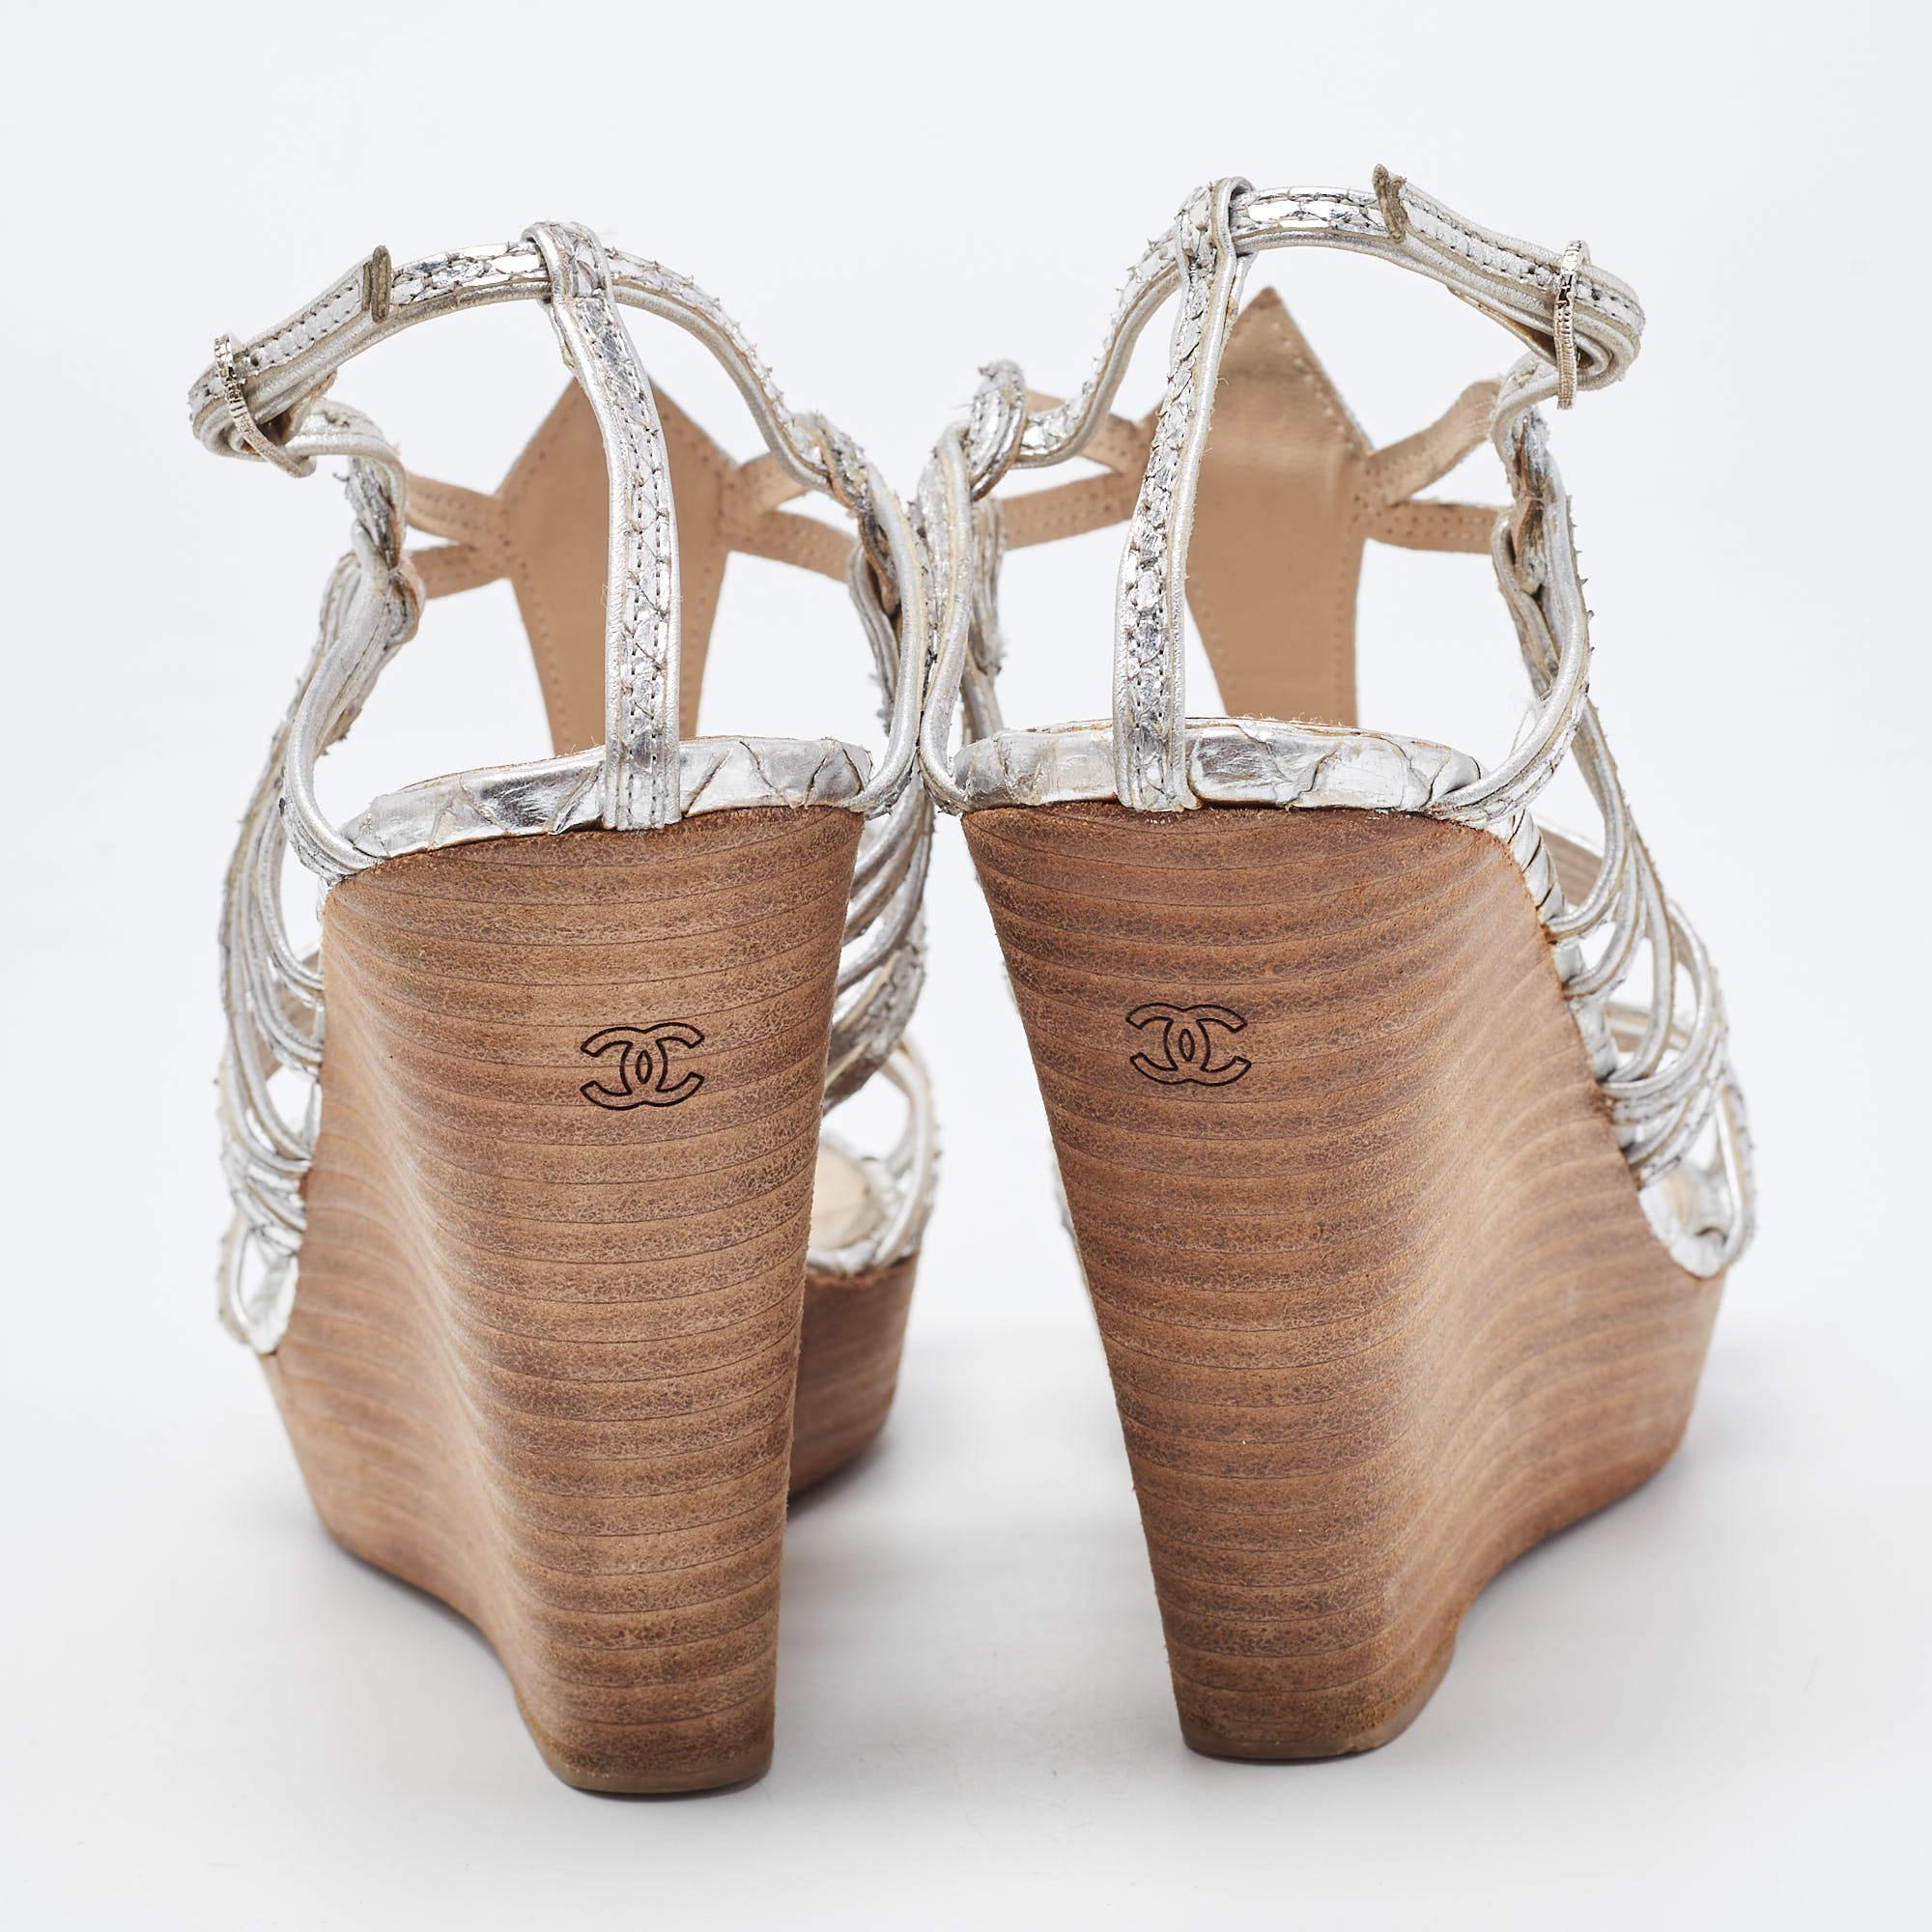 Beige Chanel Silver Python Embossed Wedge Sandals Size 37.5